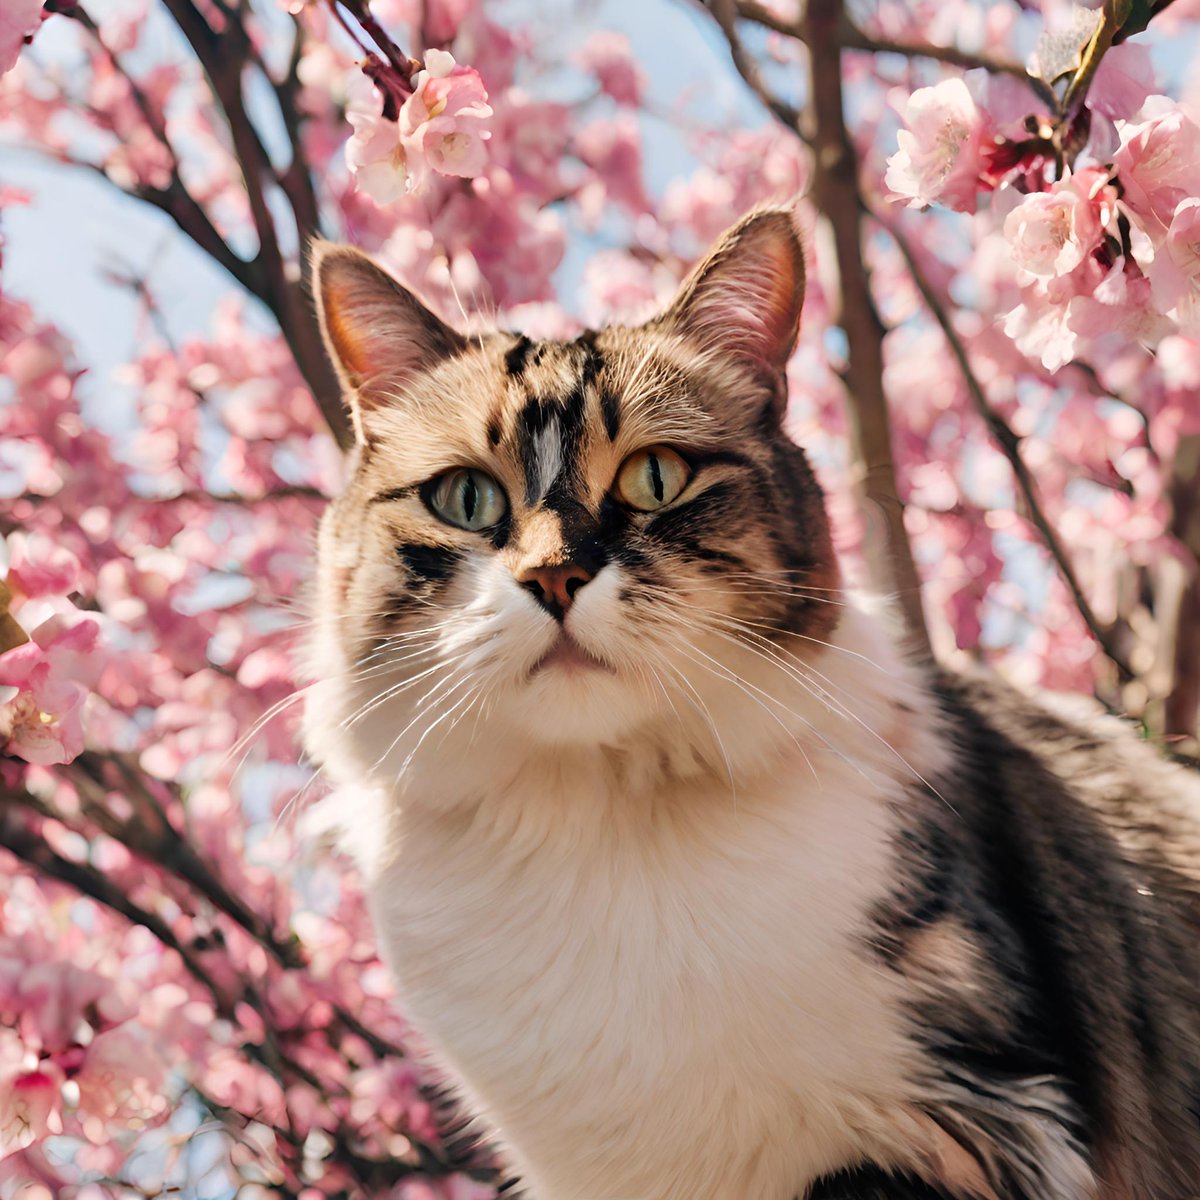 Embrace spring with your whiskered explorer! 🌸🐱 Bask in the sunshine and bond on fun outdoor adventures. #SpringVibes #CatAdventures #BondingTime